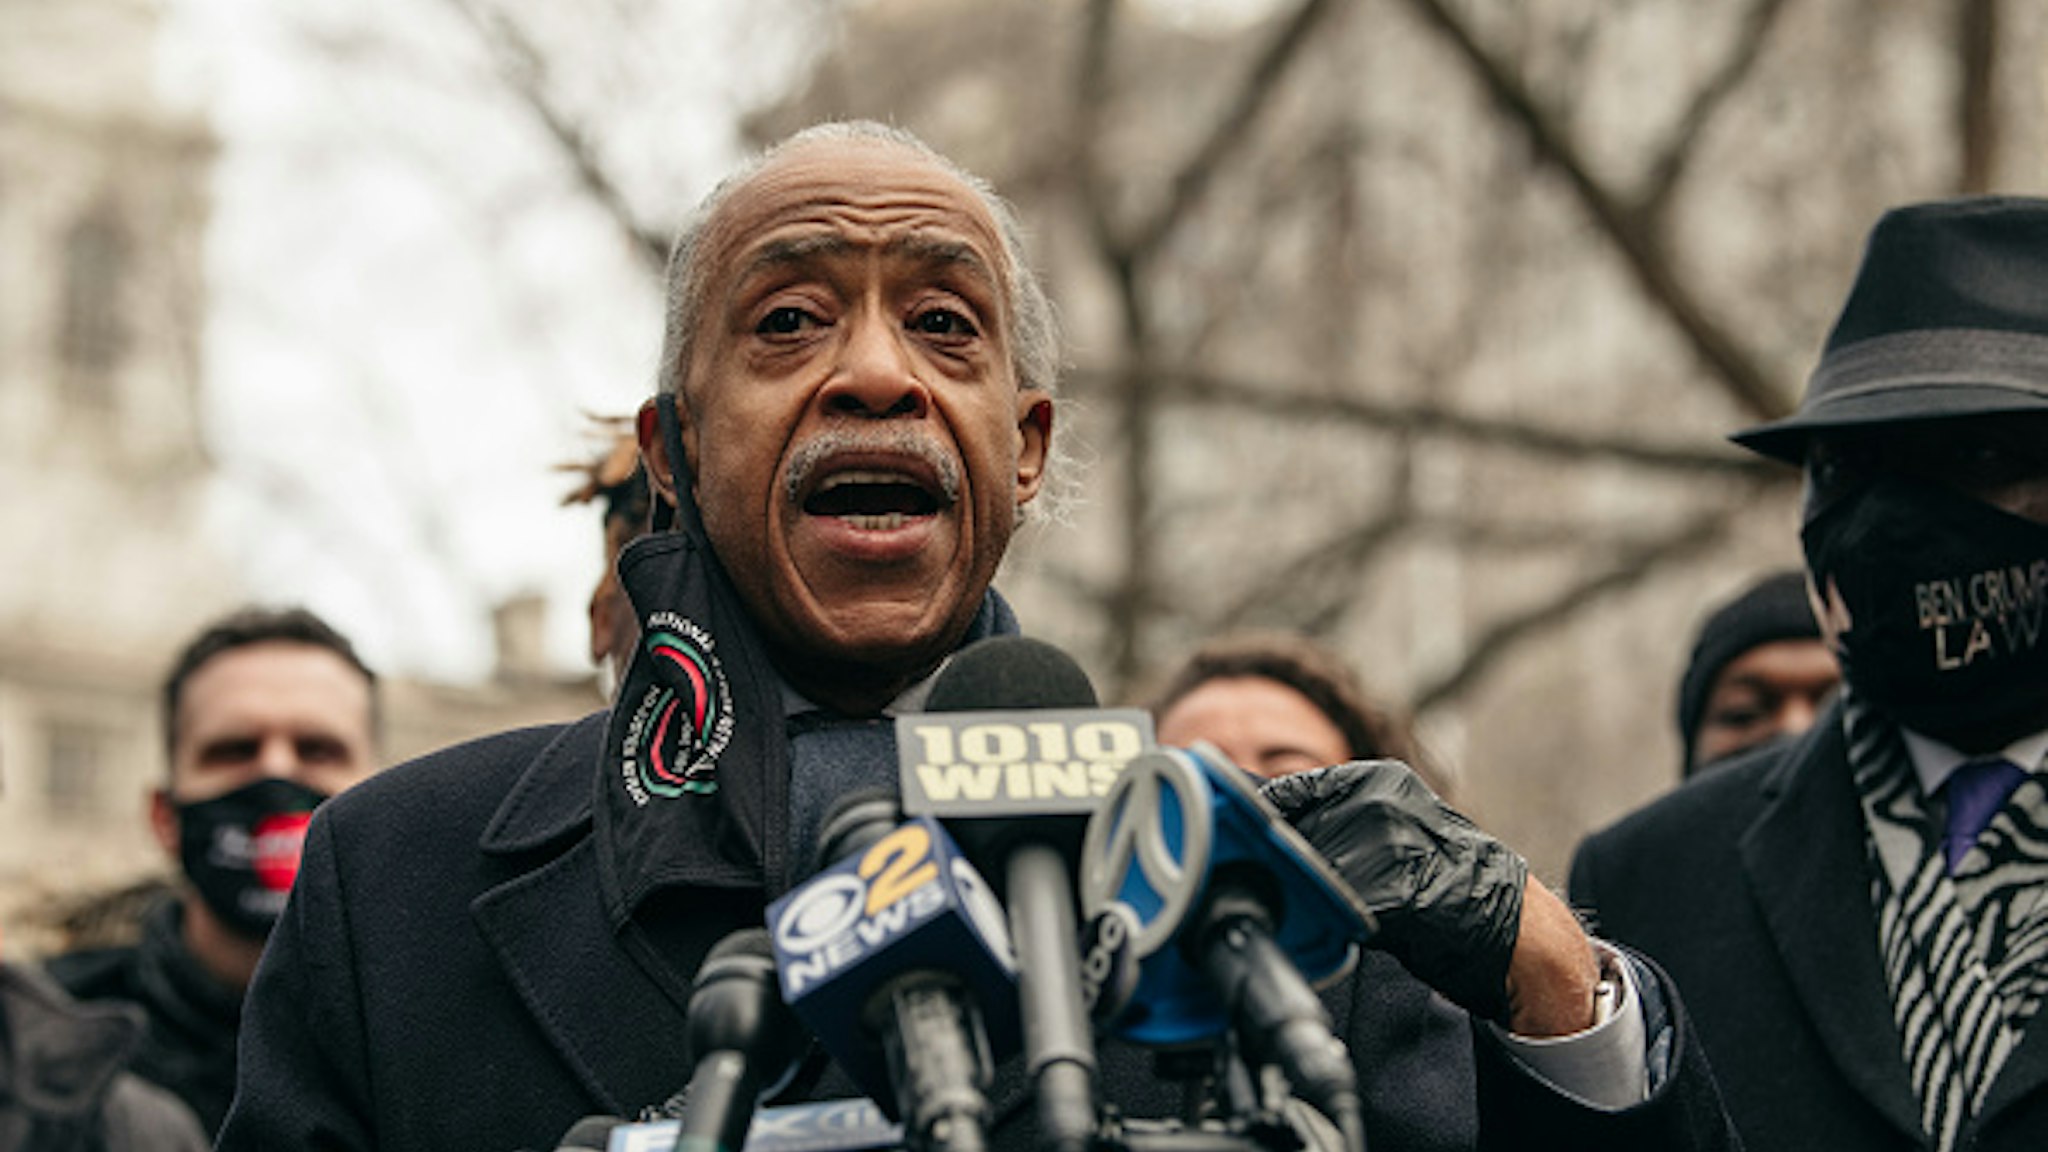 NEW YORK, NY - DECEMBER 30: Reverend Al Sharpton speaks at a press conference held by the family of Keyon Harrold Jr in lower Manhattan on December 30, 2020 in New York City. After Harrold Jr's father shared video footage of a white woman assaulting him and wrongfully accusing him of stealing her phone in a Manhattan hotel lobby, civil rights leaders have called for an end to persistent racial profiling and injustice.